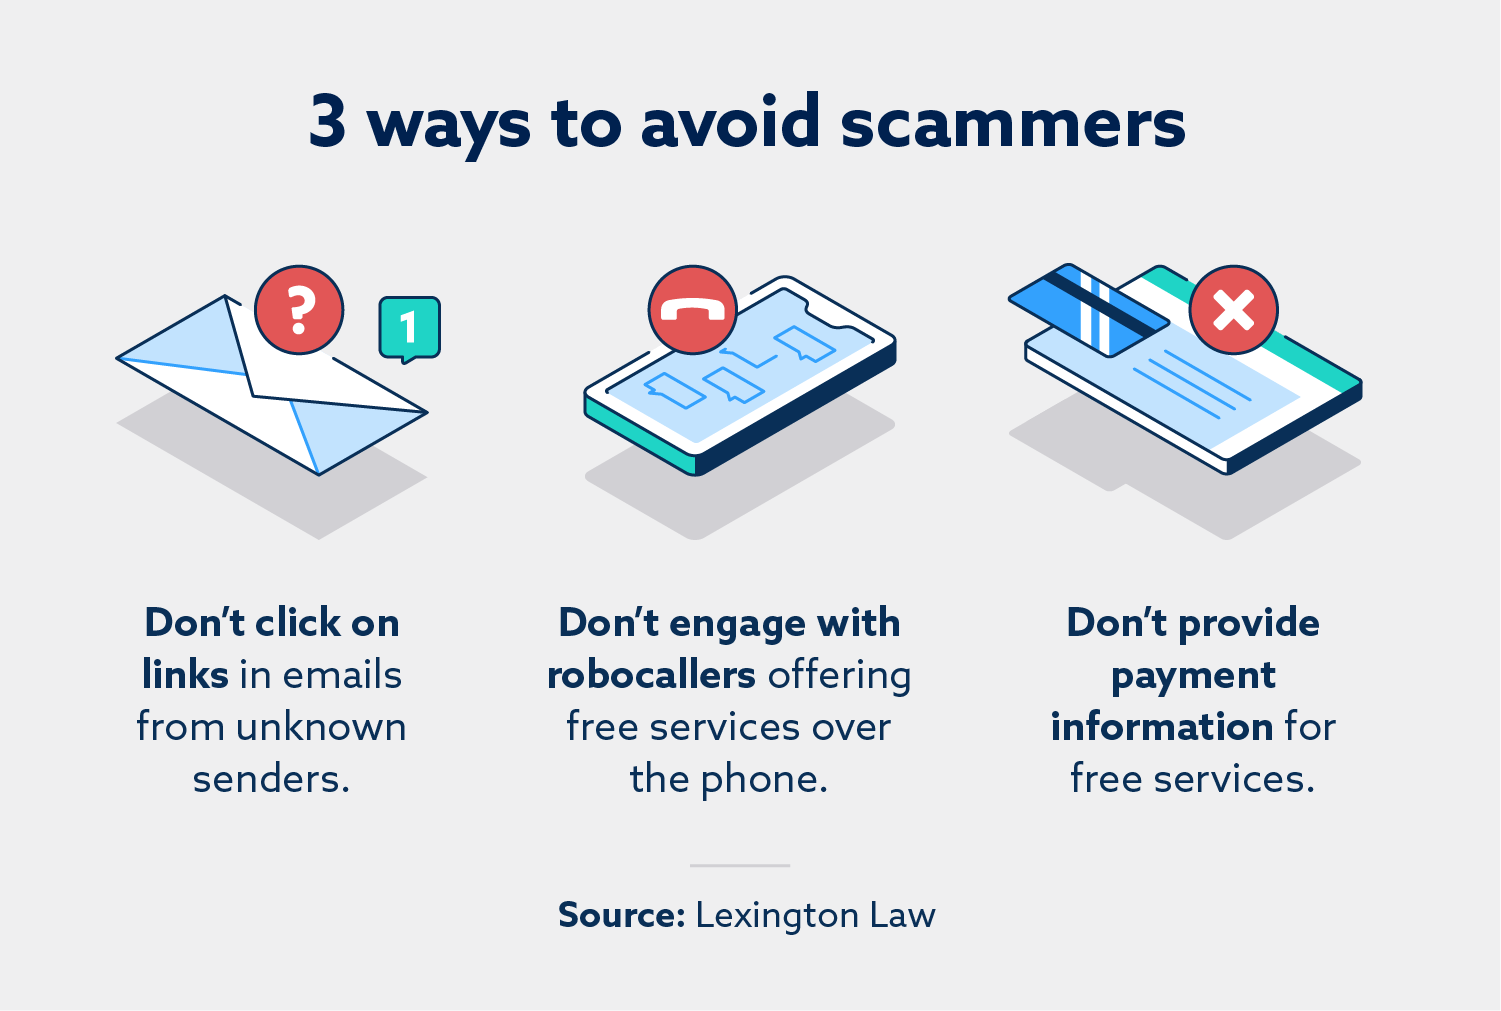 How to avoid scammers